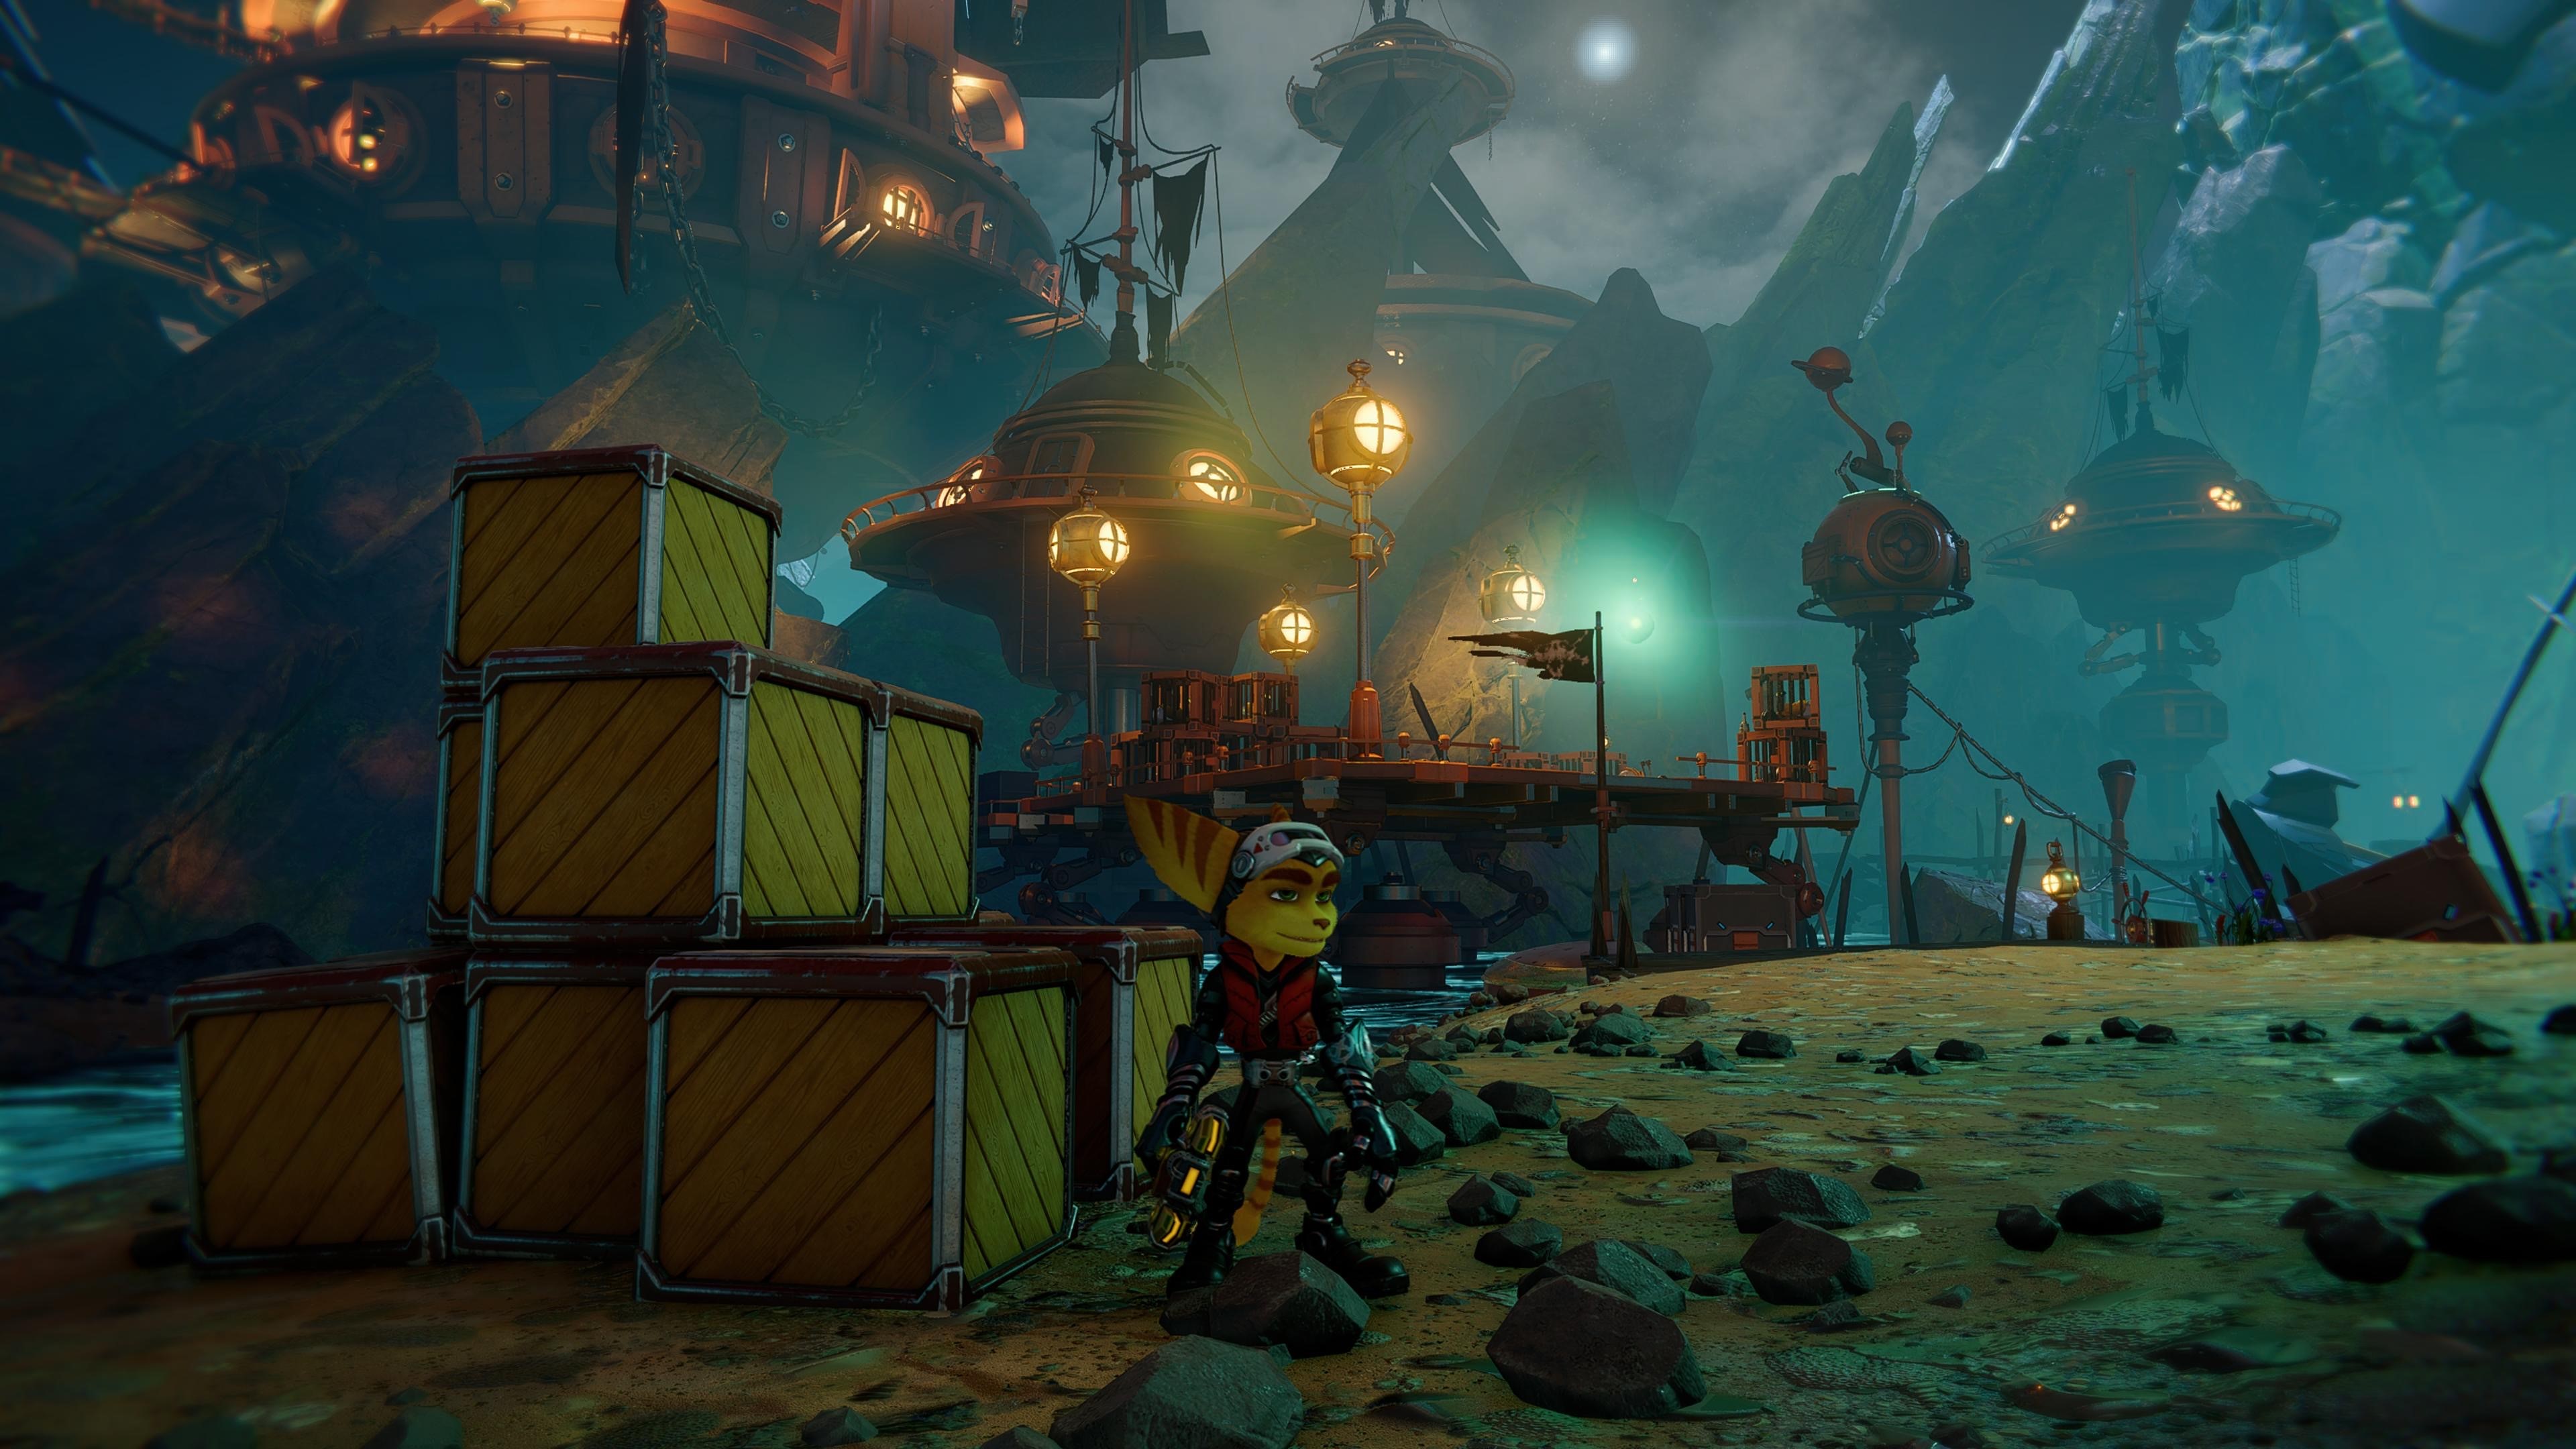 Return Policy trophy in Ratchet & Clank: Rift Apart